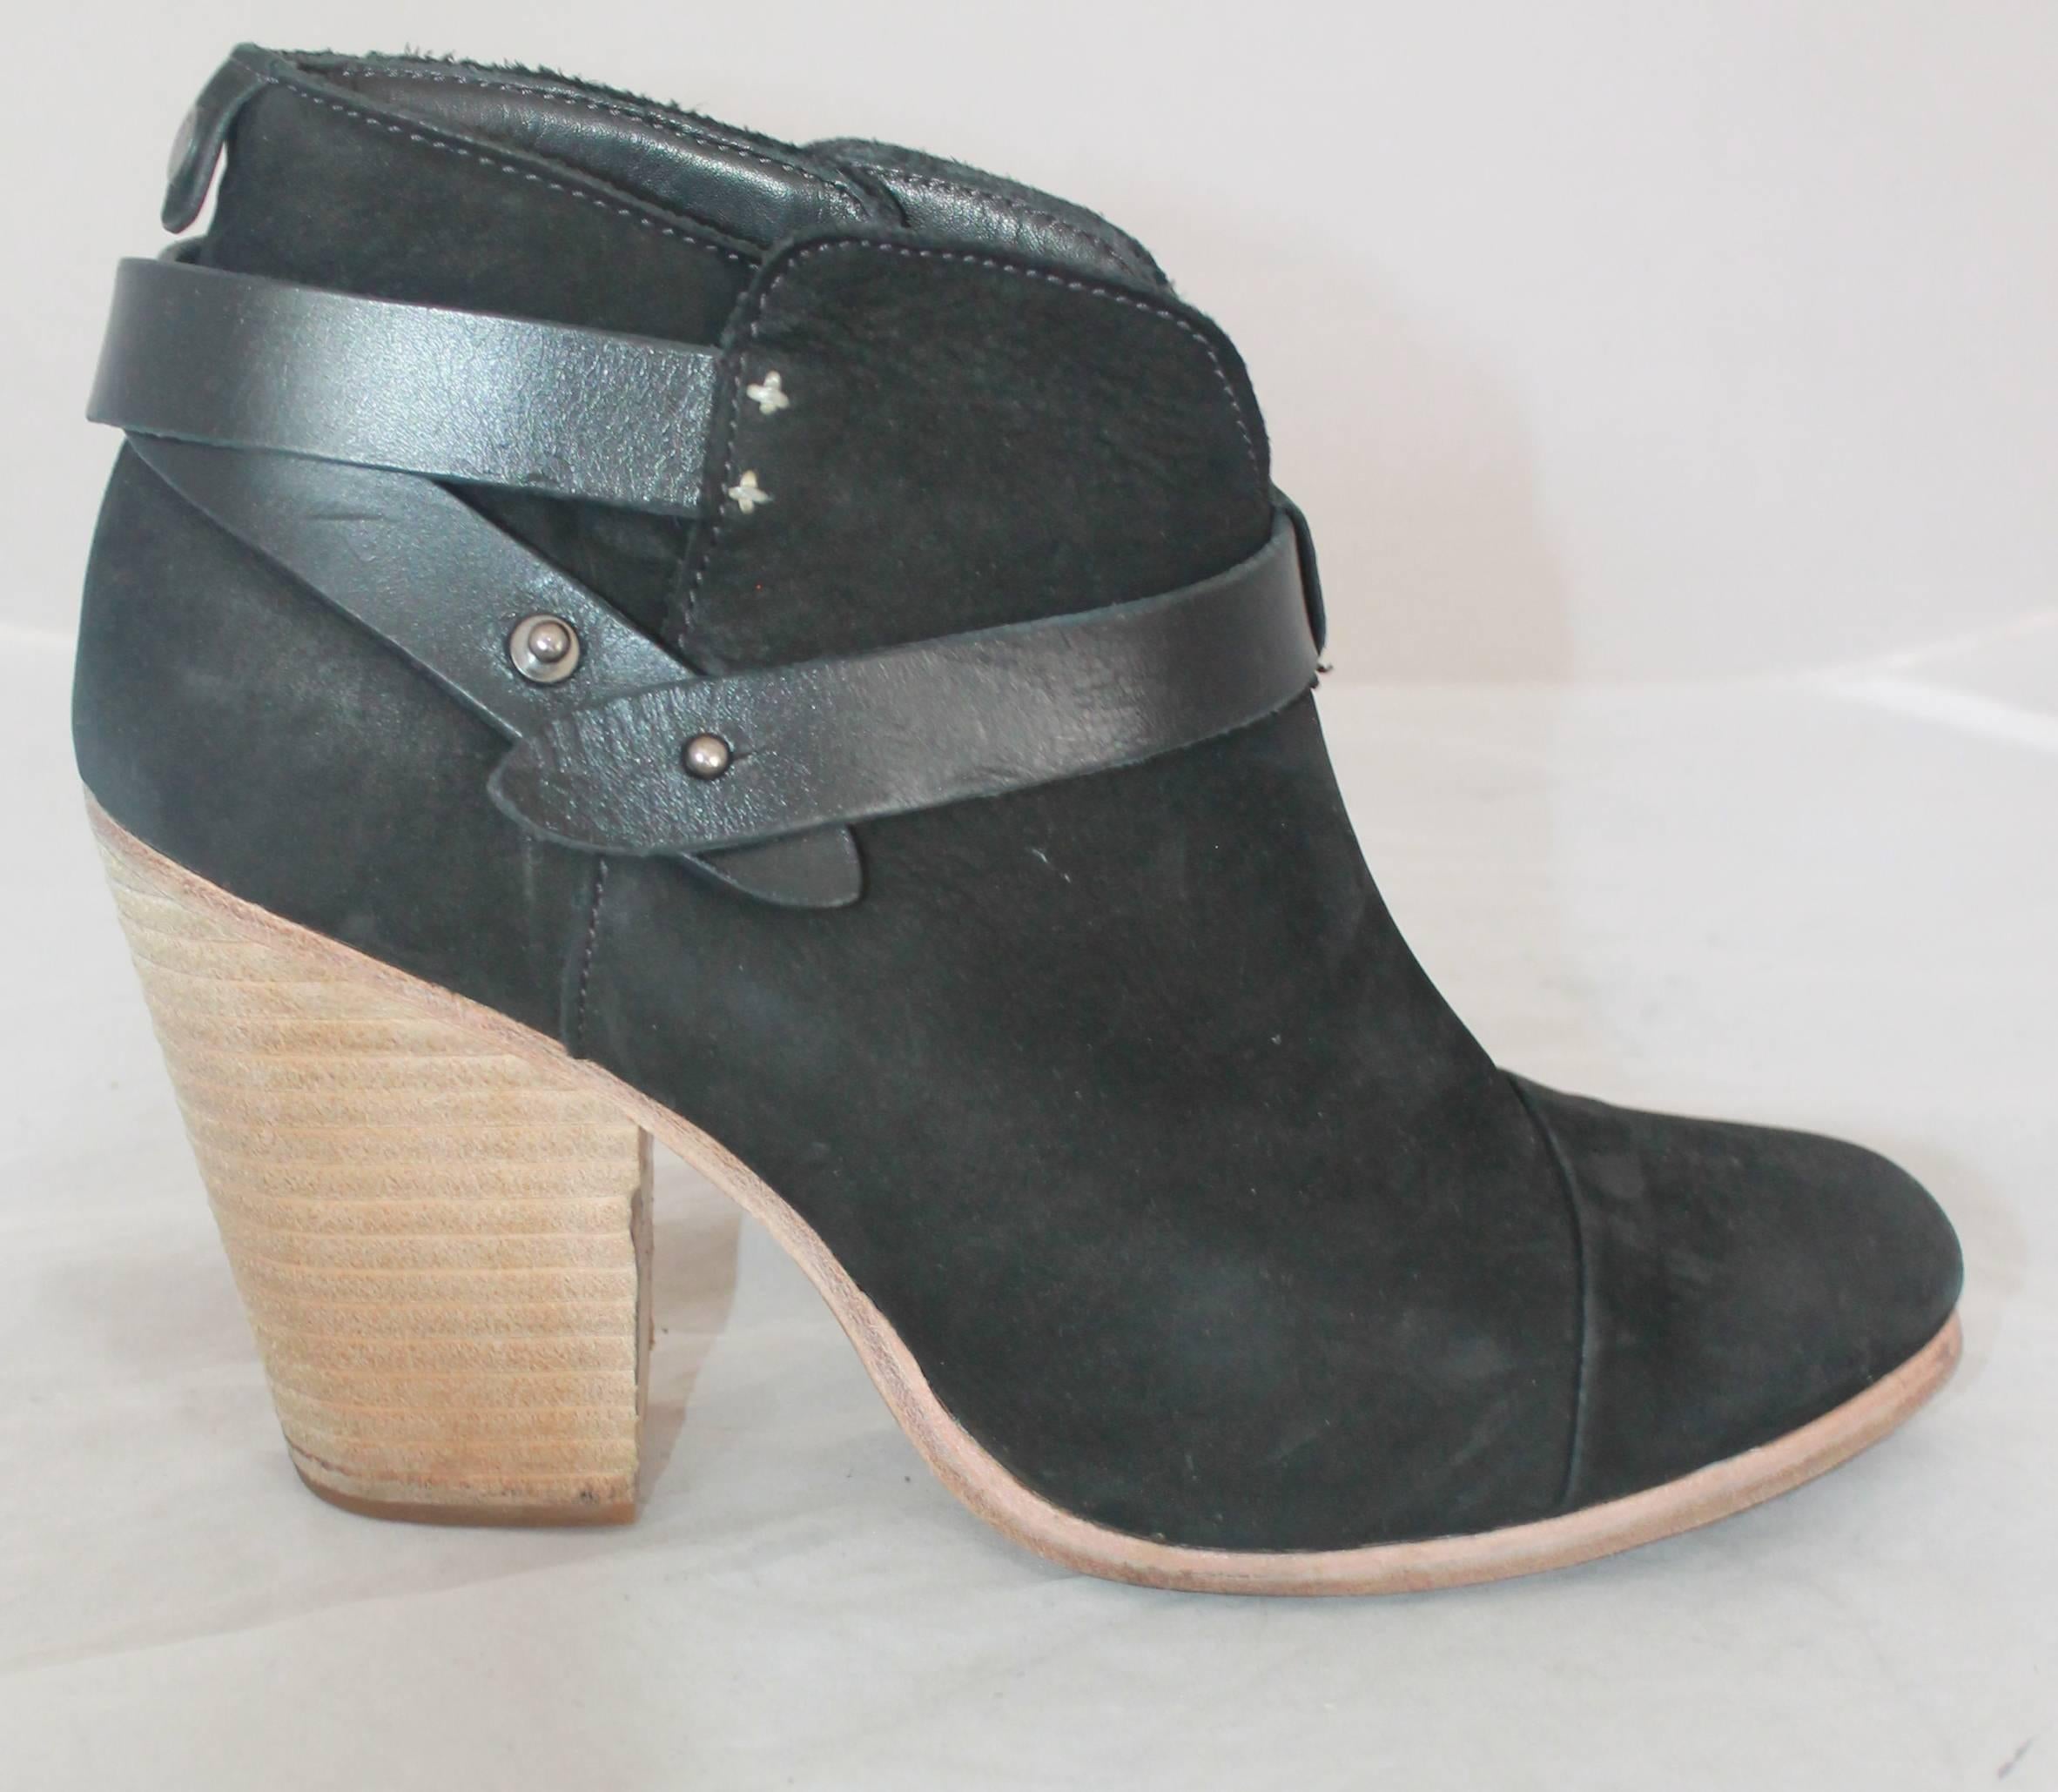 Rag & Bone Black Suede Black booties w/ Leather Wrap-Around Strap - 41.  These adorable booties are in good condition with only some noticeable wear on the sole and suede.  They feature black wrap-around straps on the top and a wooden